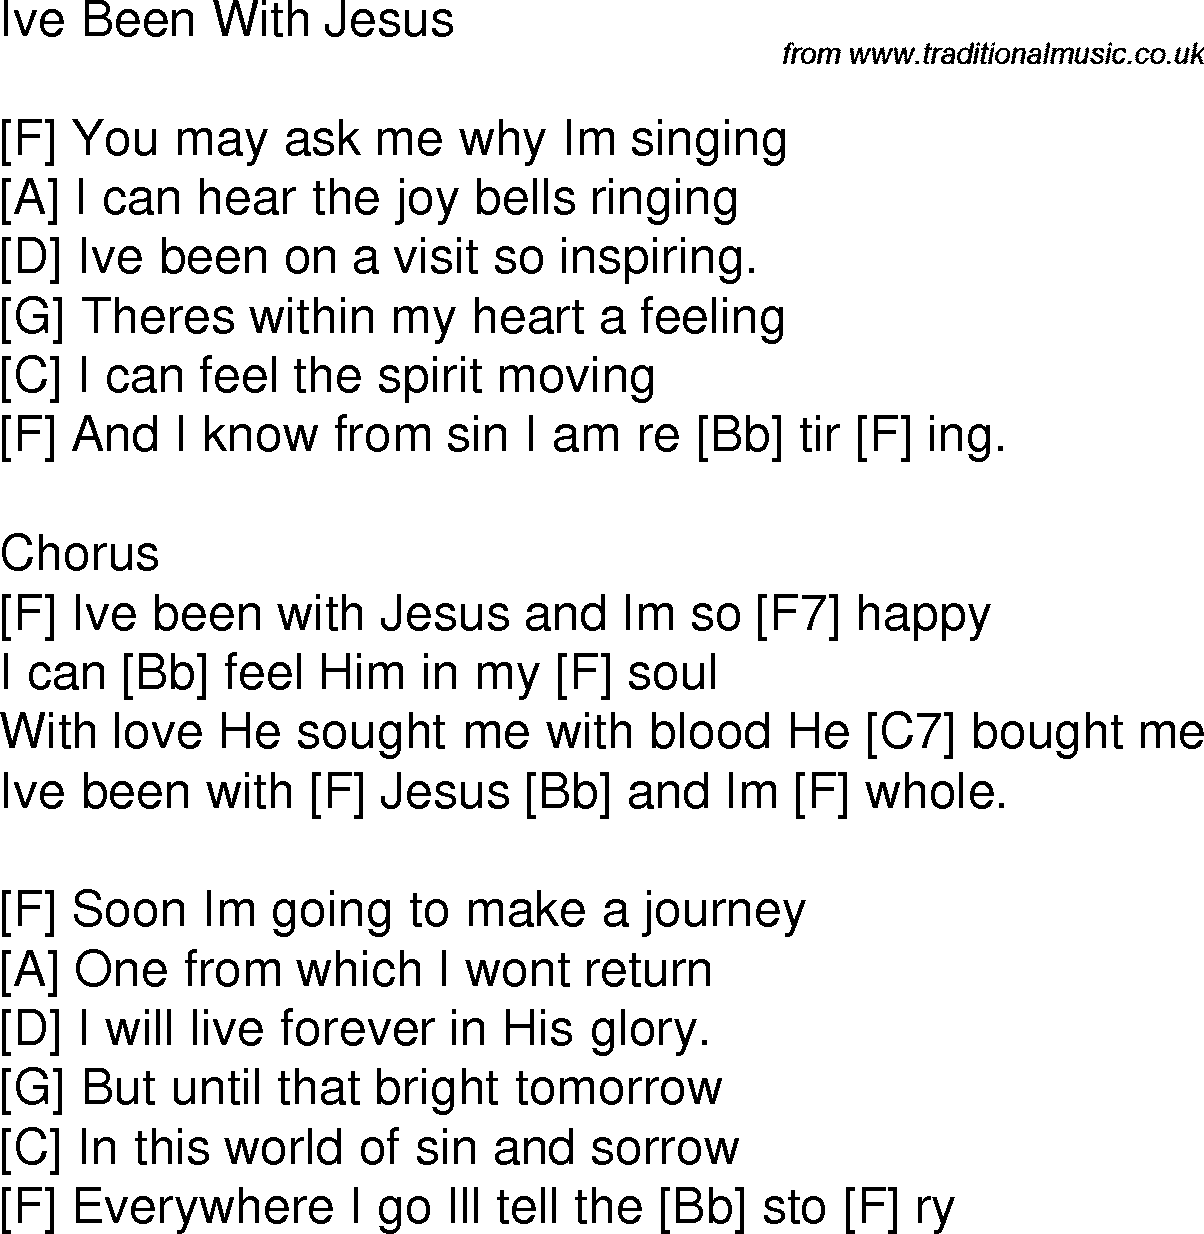 Old time song lyrics with chords for I've Been With Jesus F